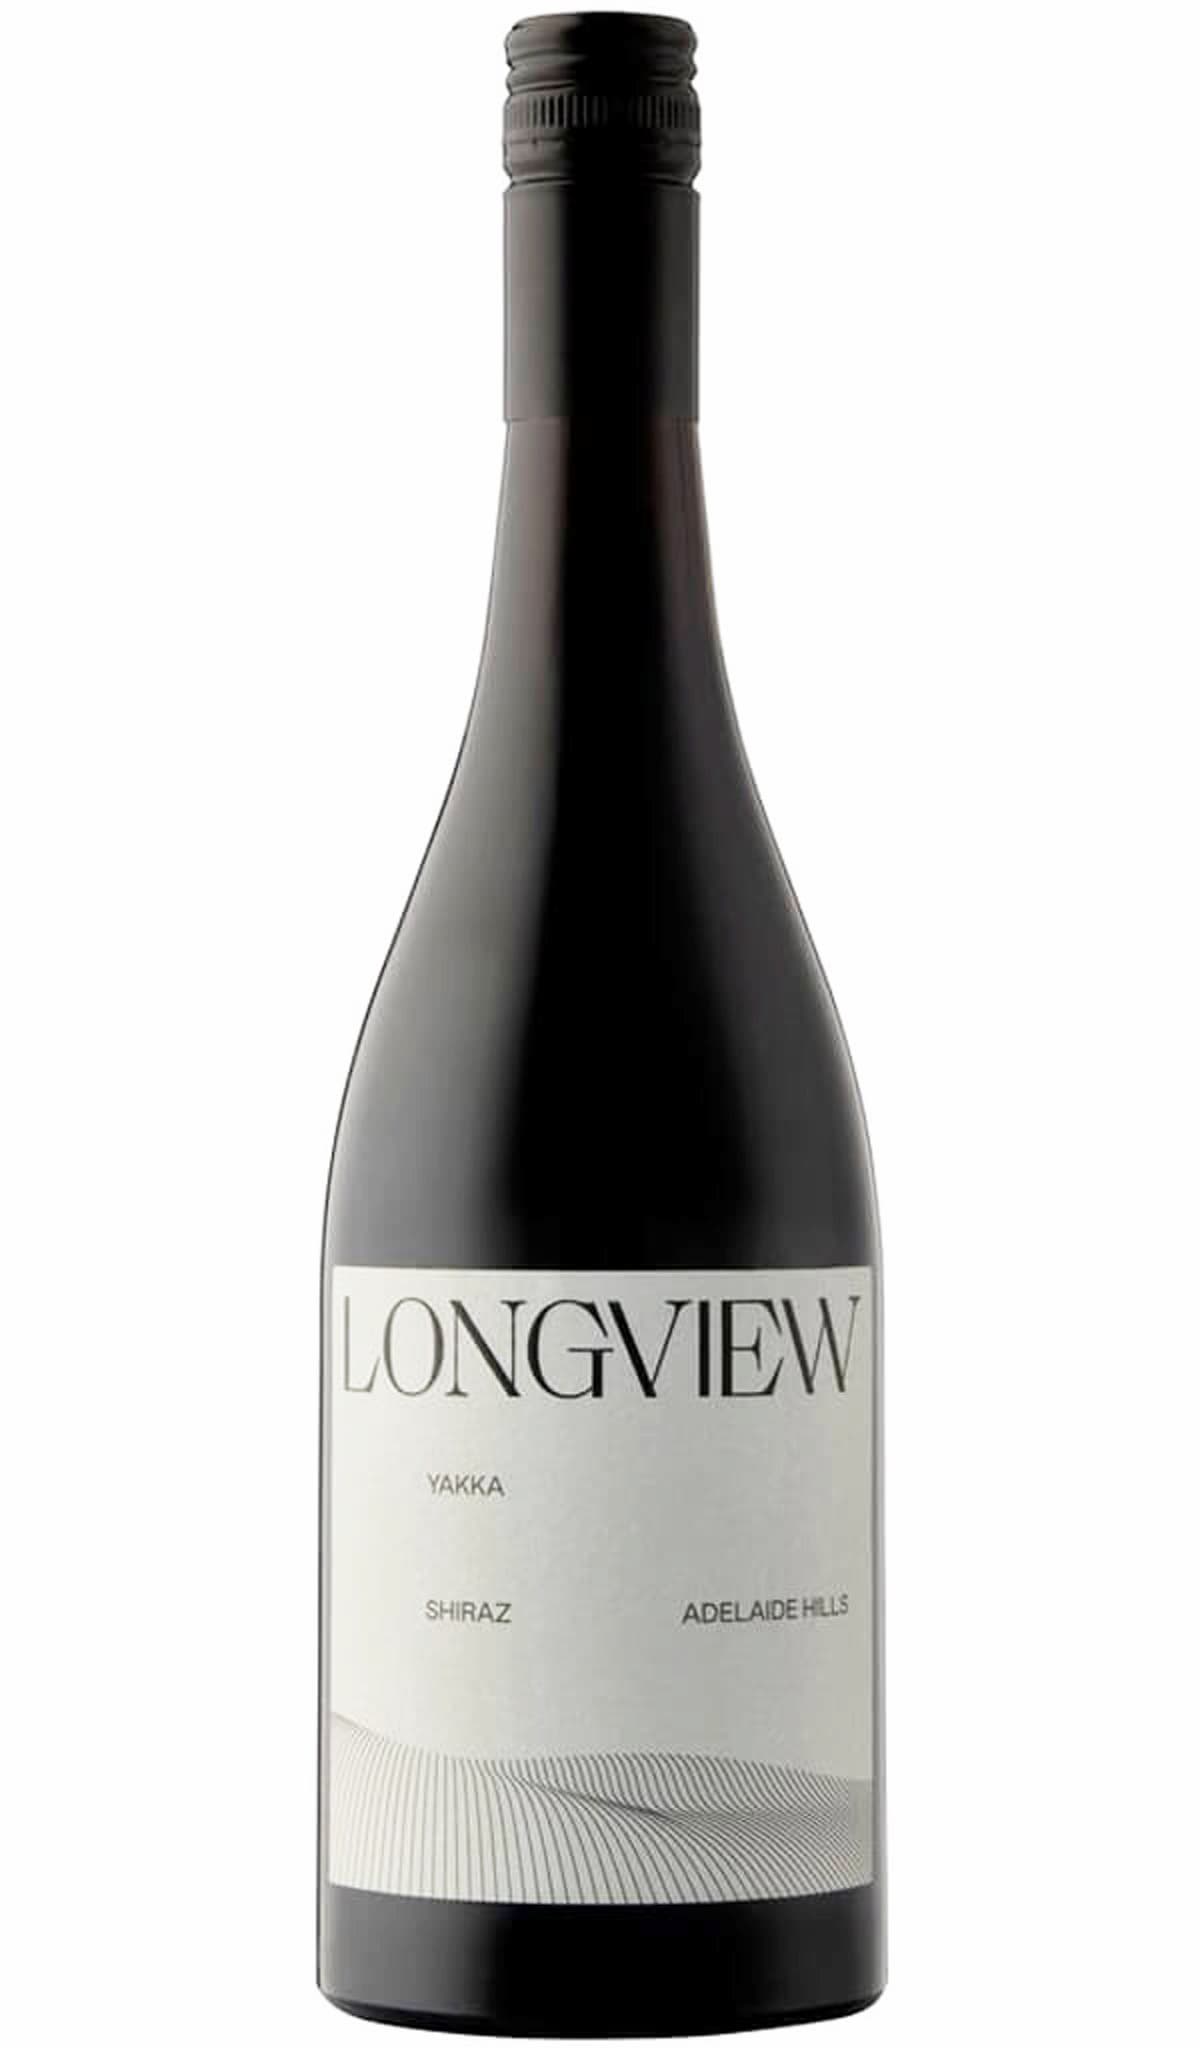 Find out more or buy Longview Vineyard Yakka Shiraz 2021 (Adelaide Hills) online at Wine Sellers Direct - Australia’s independent liquor specialists.